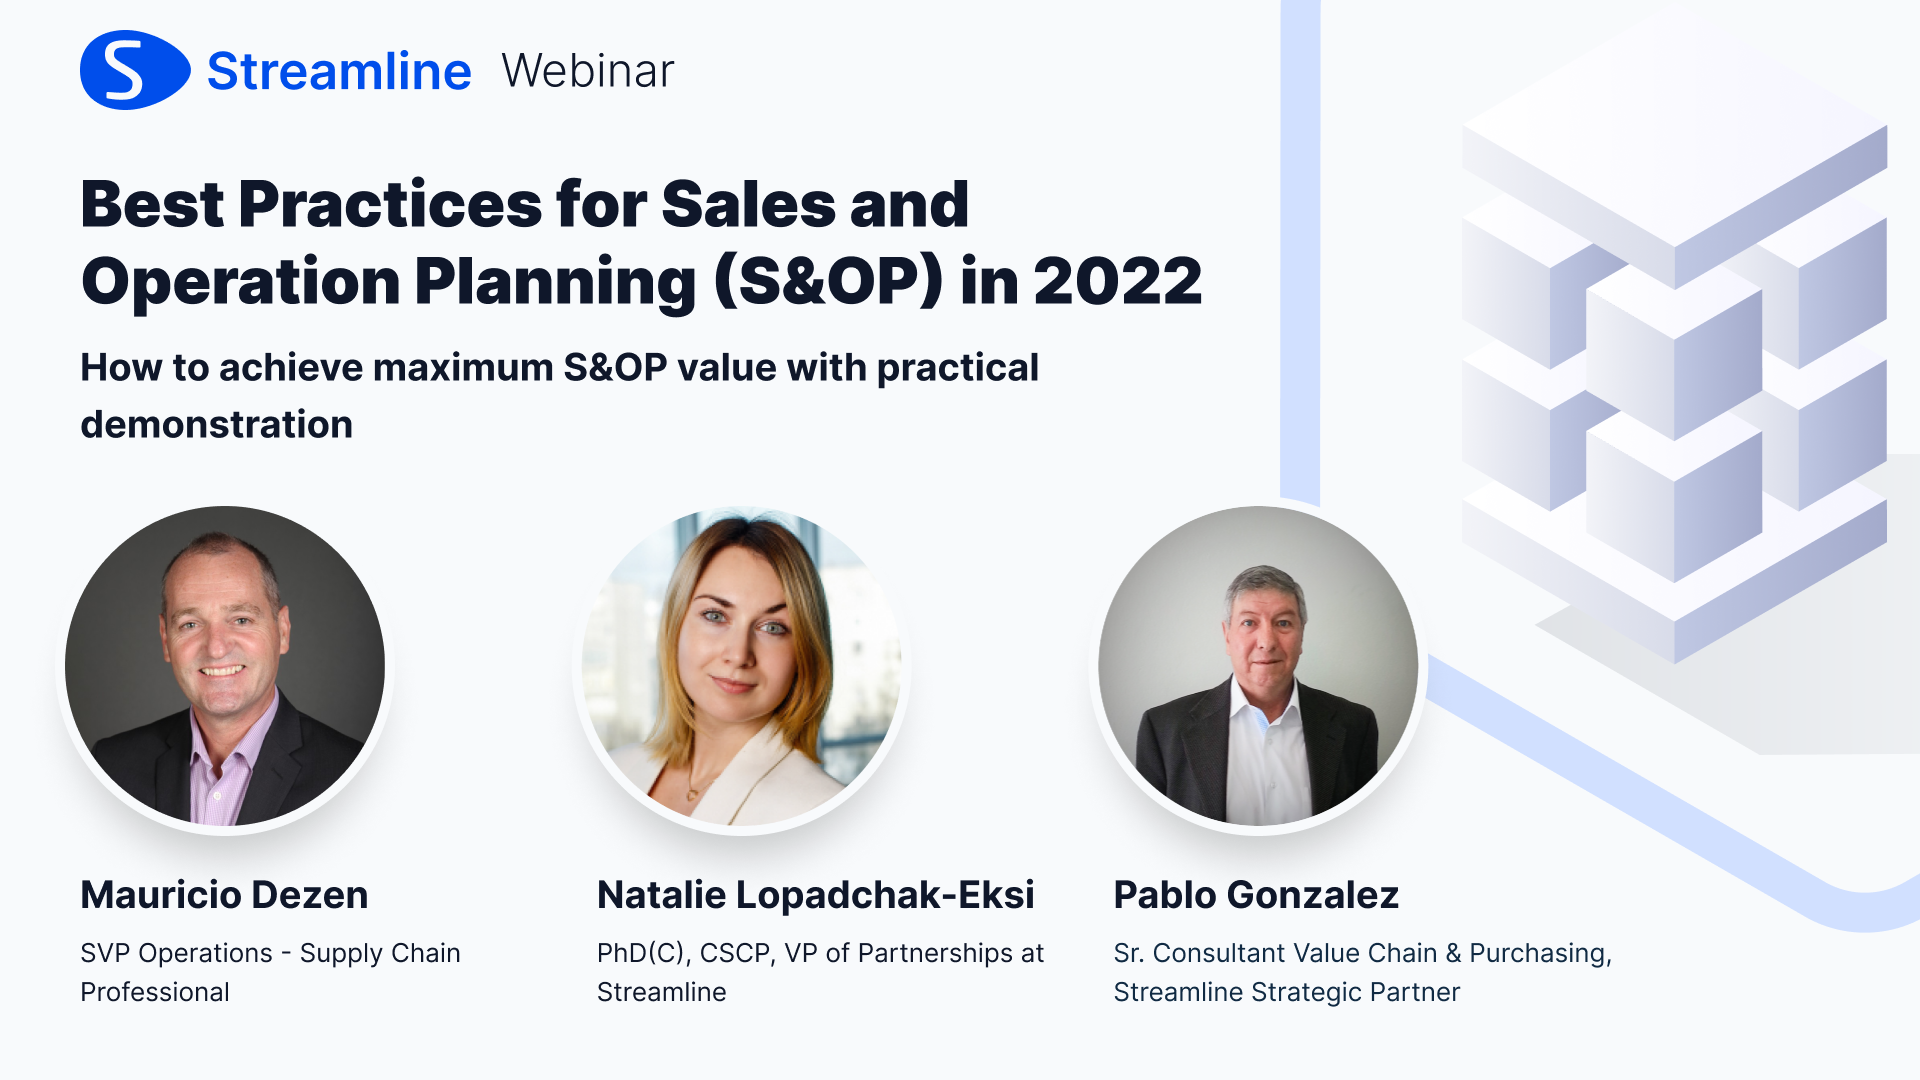 Best Practices for Sales and Operation Planning in 2022